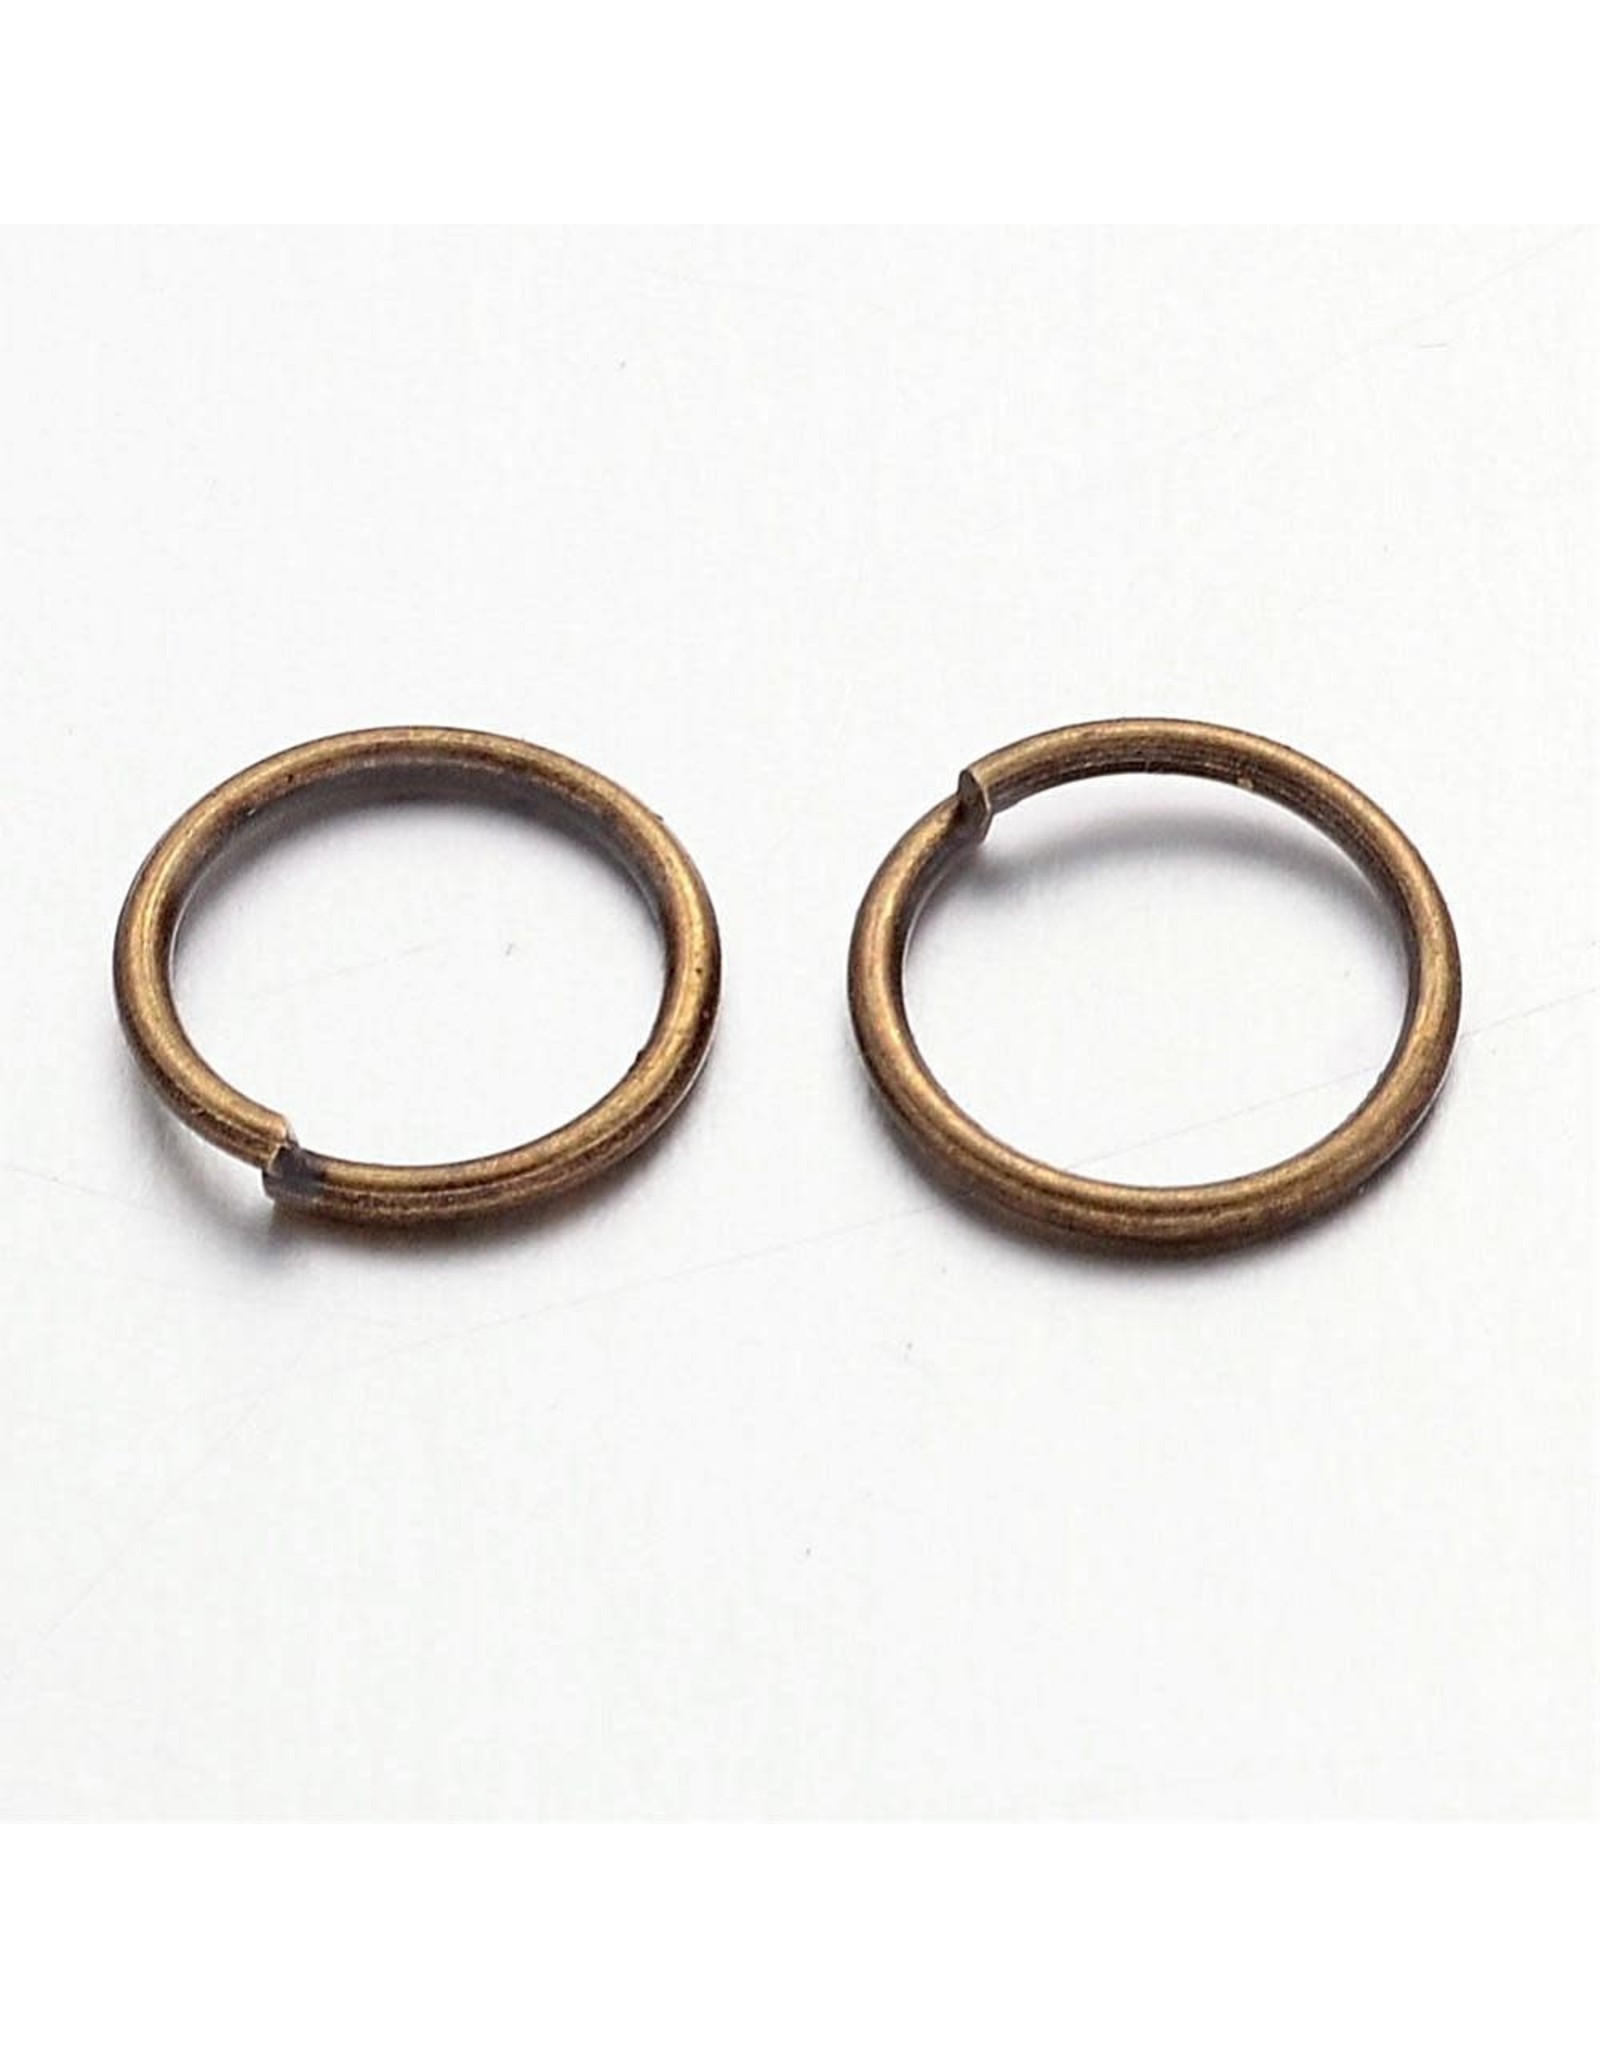 Jump Ring 8mm Antique Brass  approx 21g  x100 NF